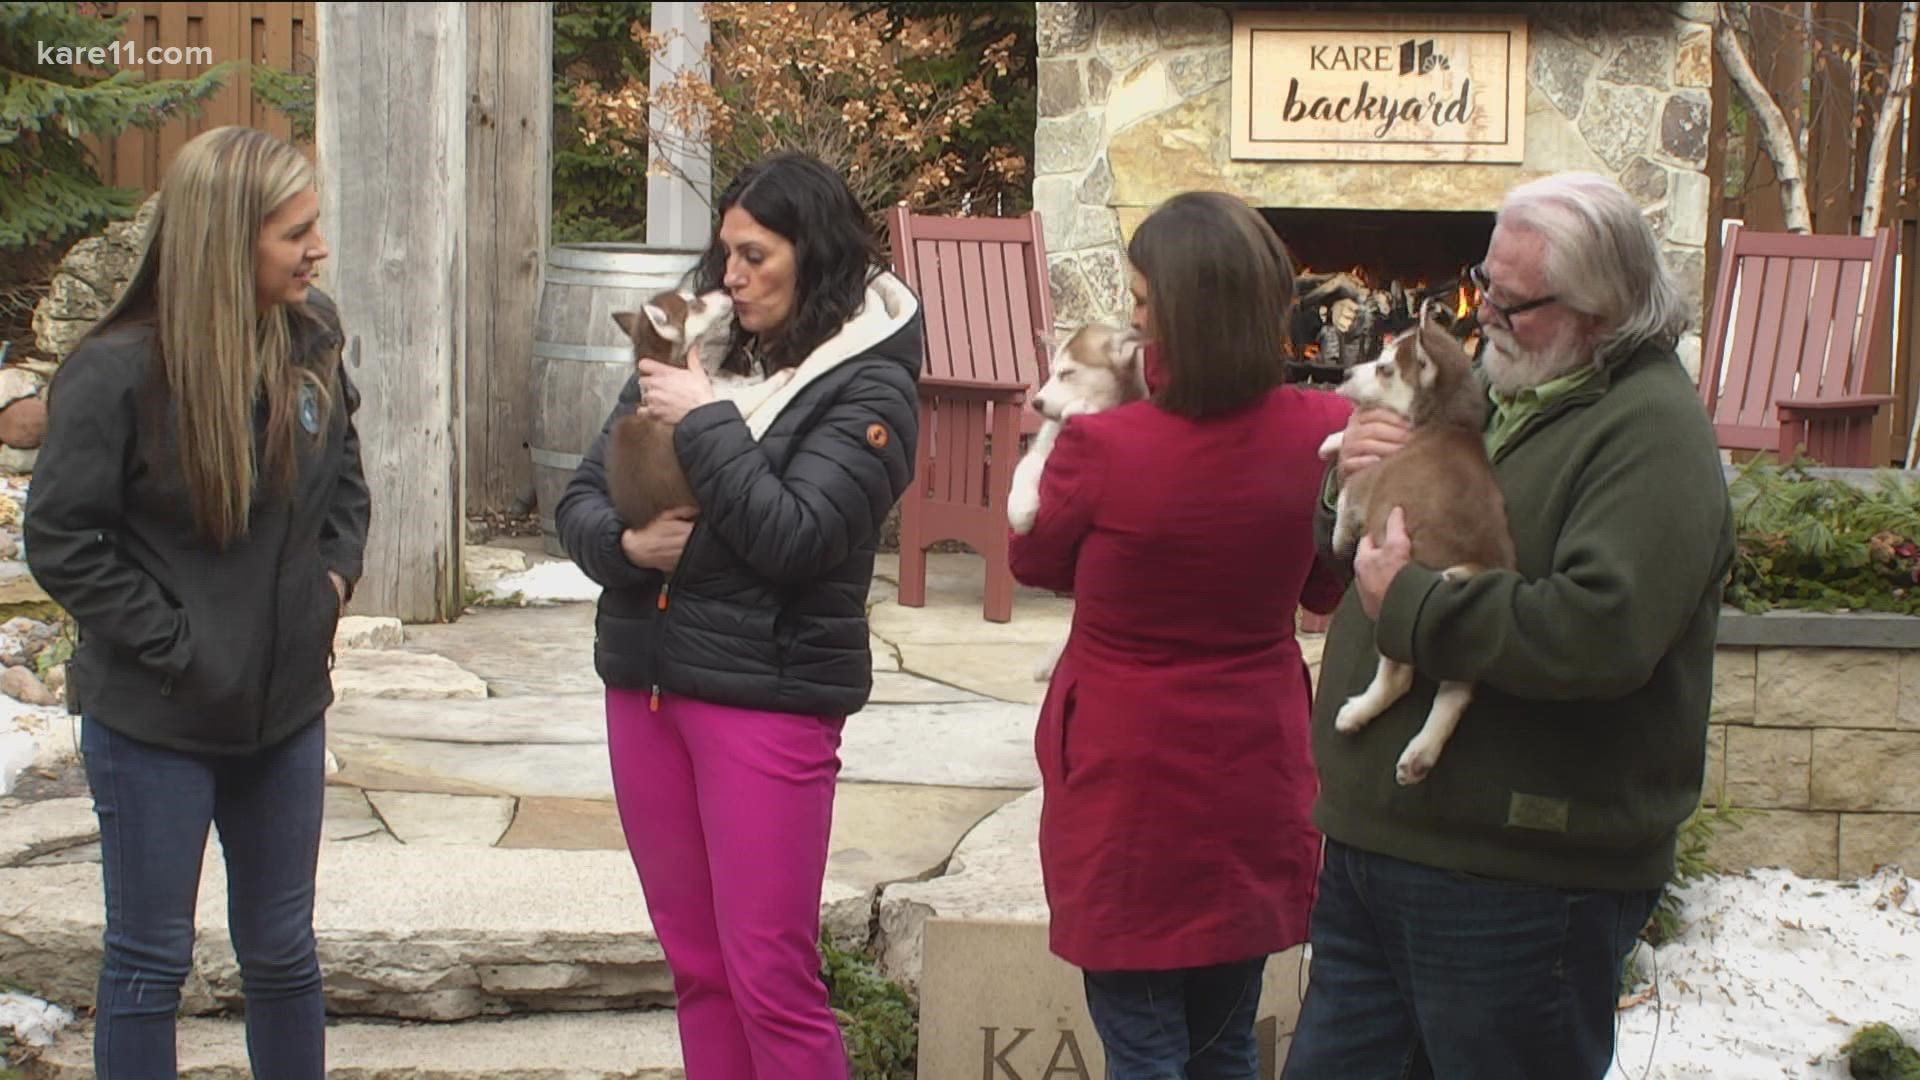 During KARE 11 Saturday, Ruff Start Rescue's executive director outlined some questions every potential pet owner should ask a rescue or shelter before adopting.